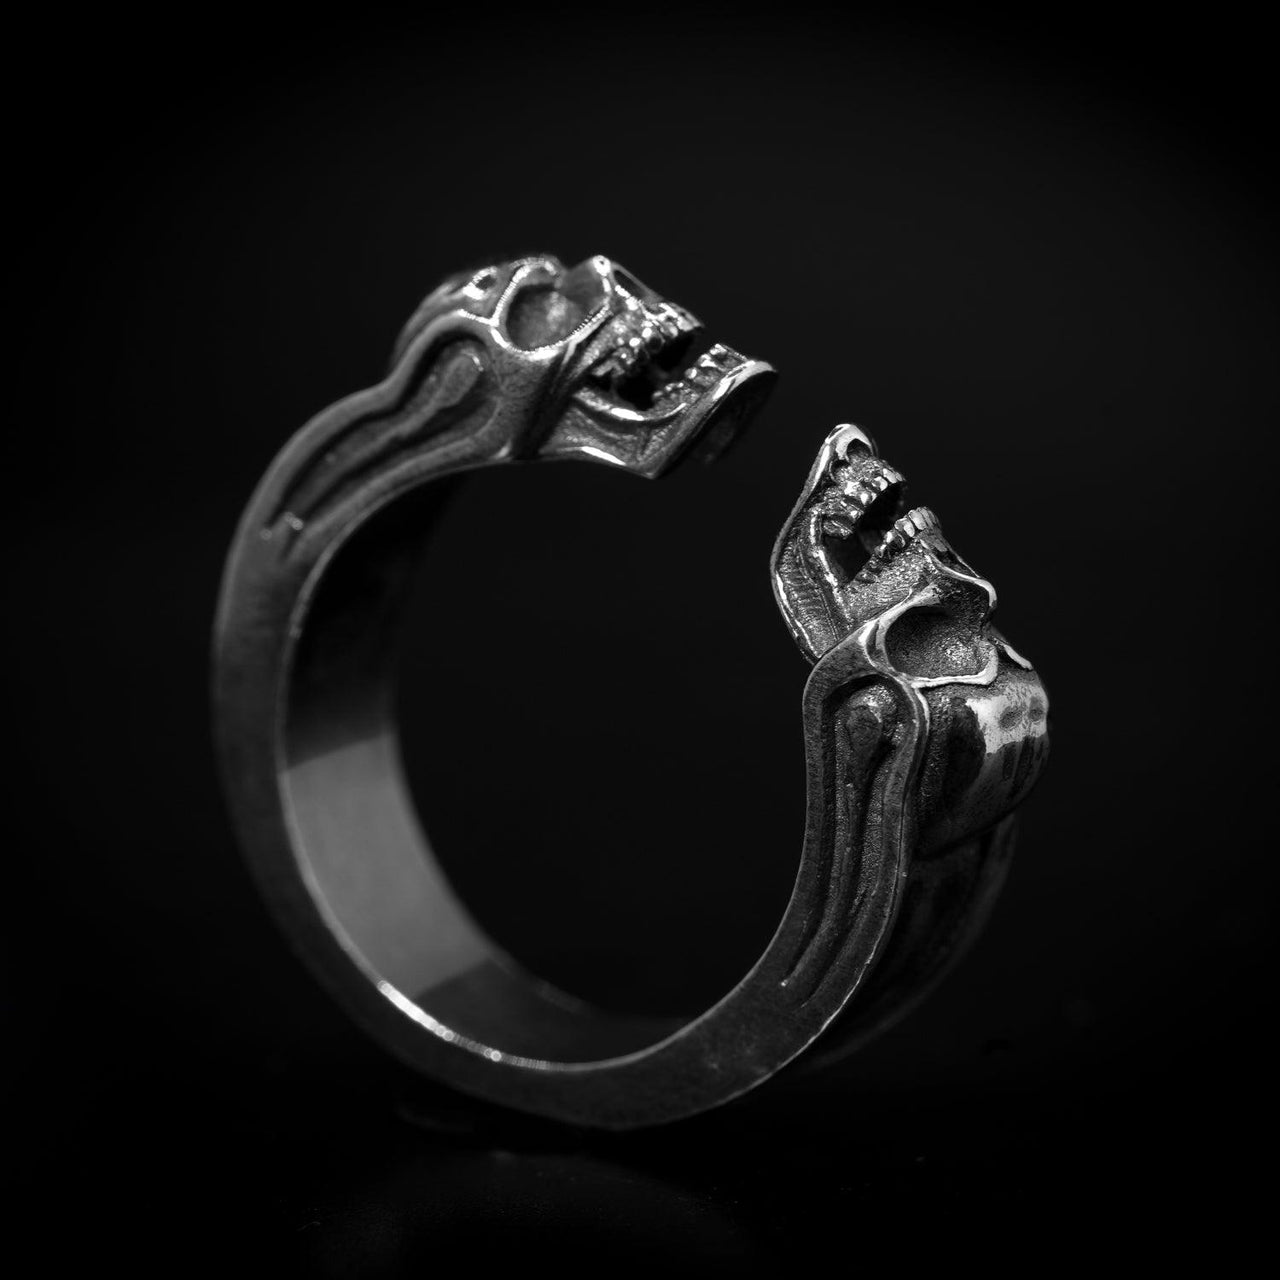 Twin Skull Ring in 925 Sterling Silver - Black Feather Design